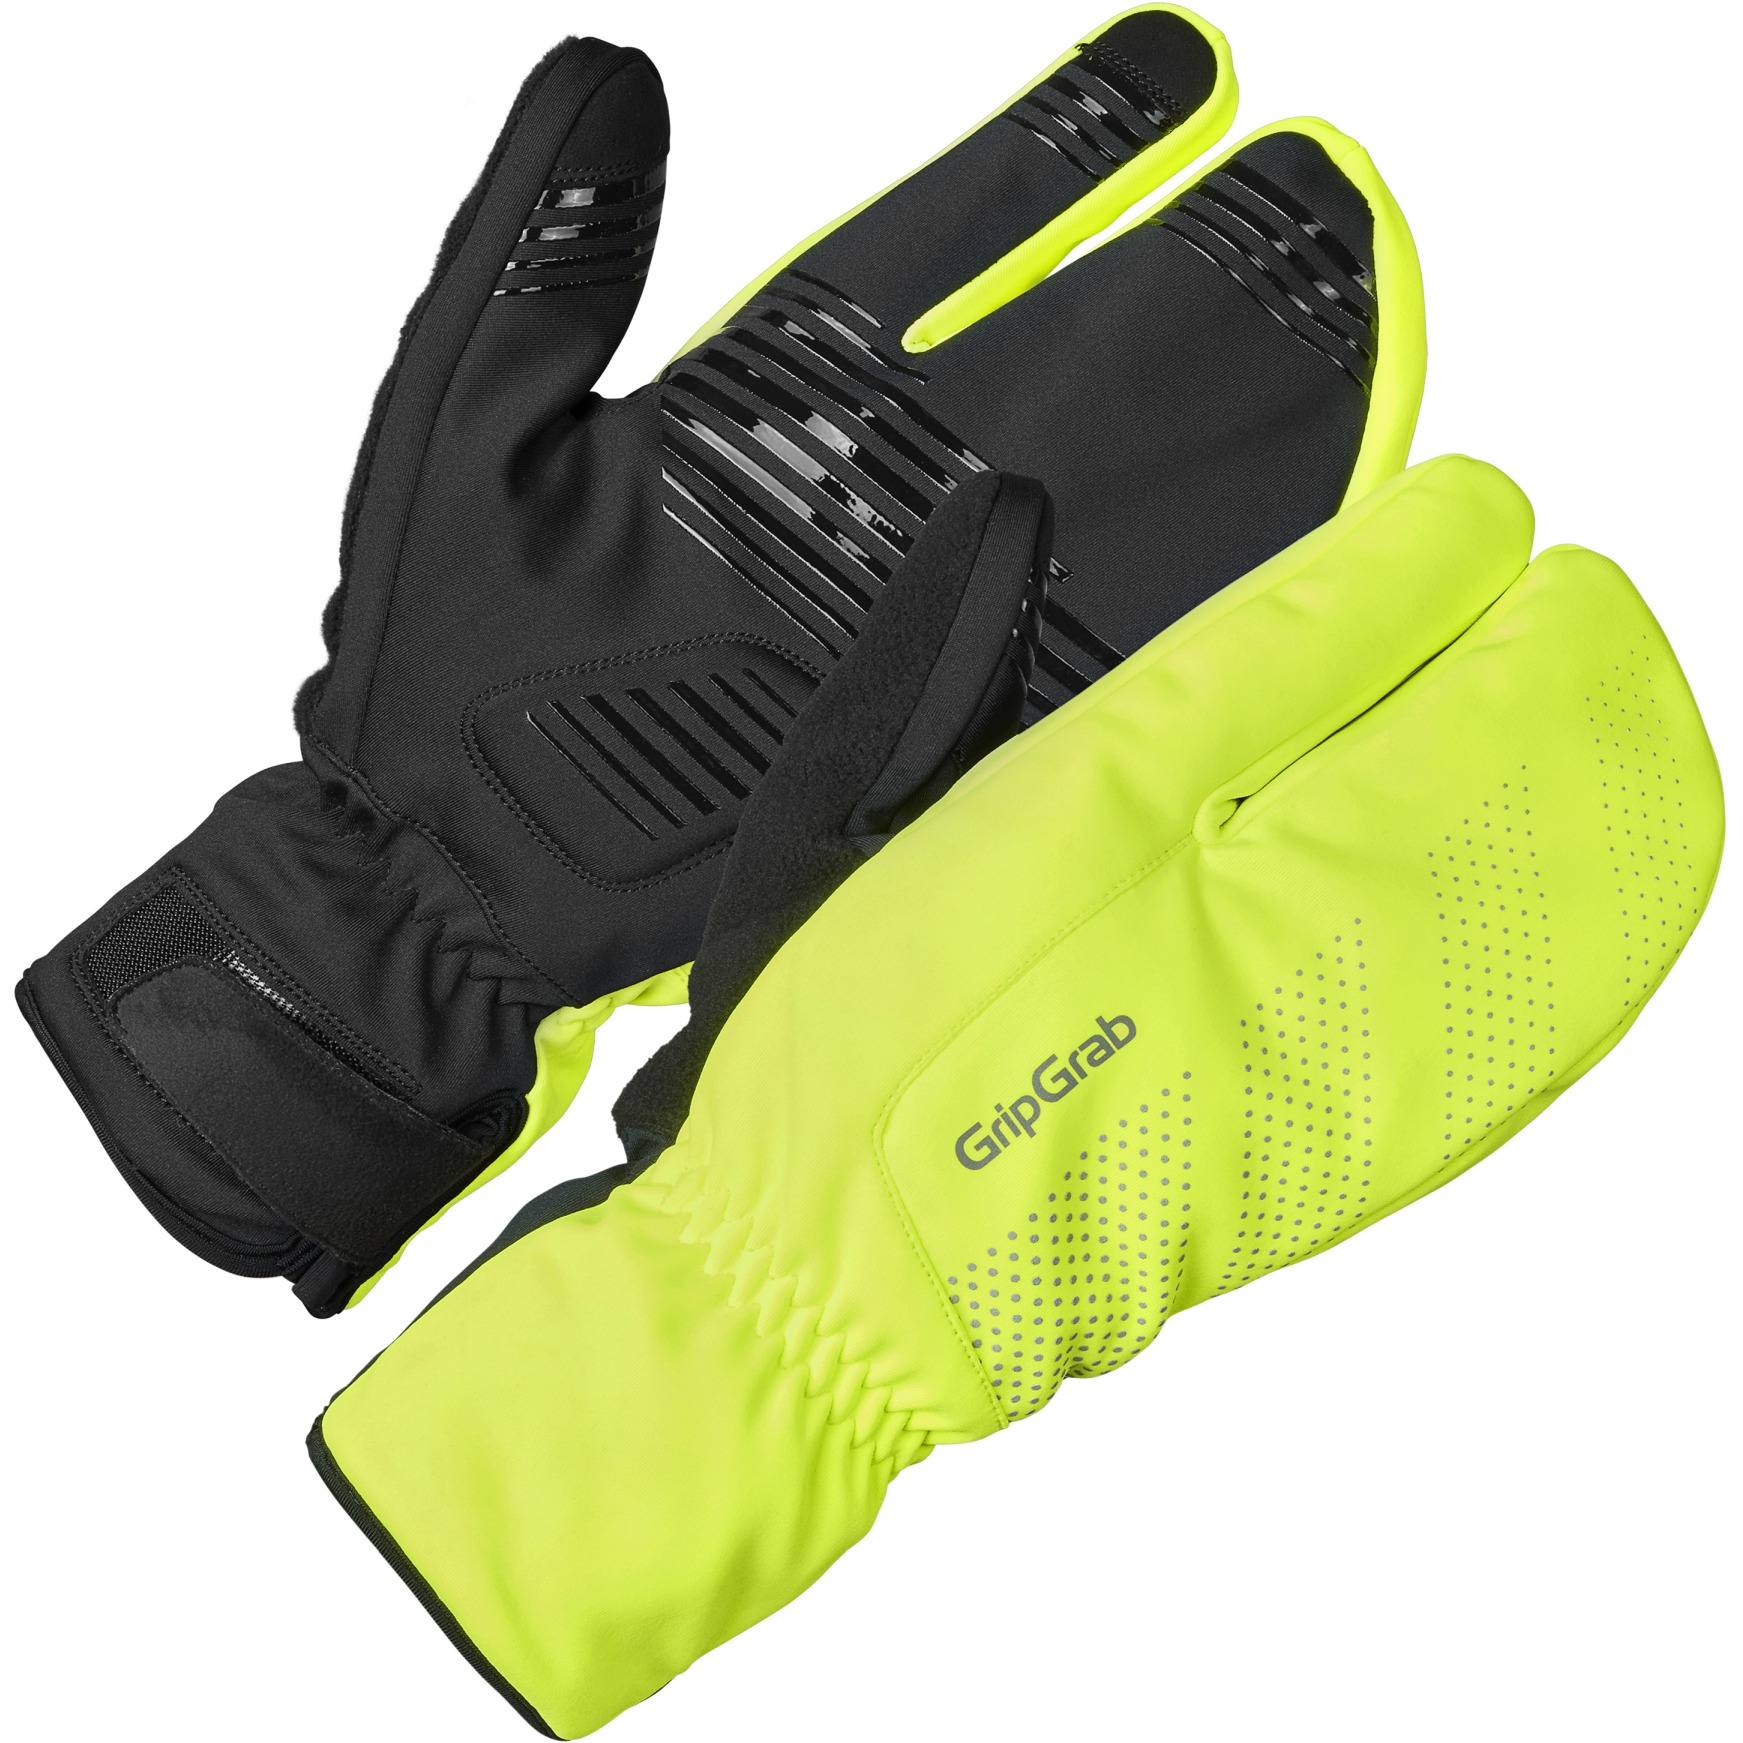 Picture of GripGrab Ride Windproof Deep Winter Lobster Gloves - yellow hi-vis